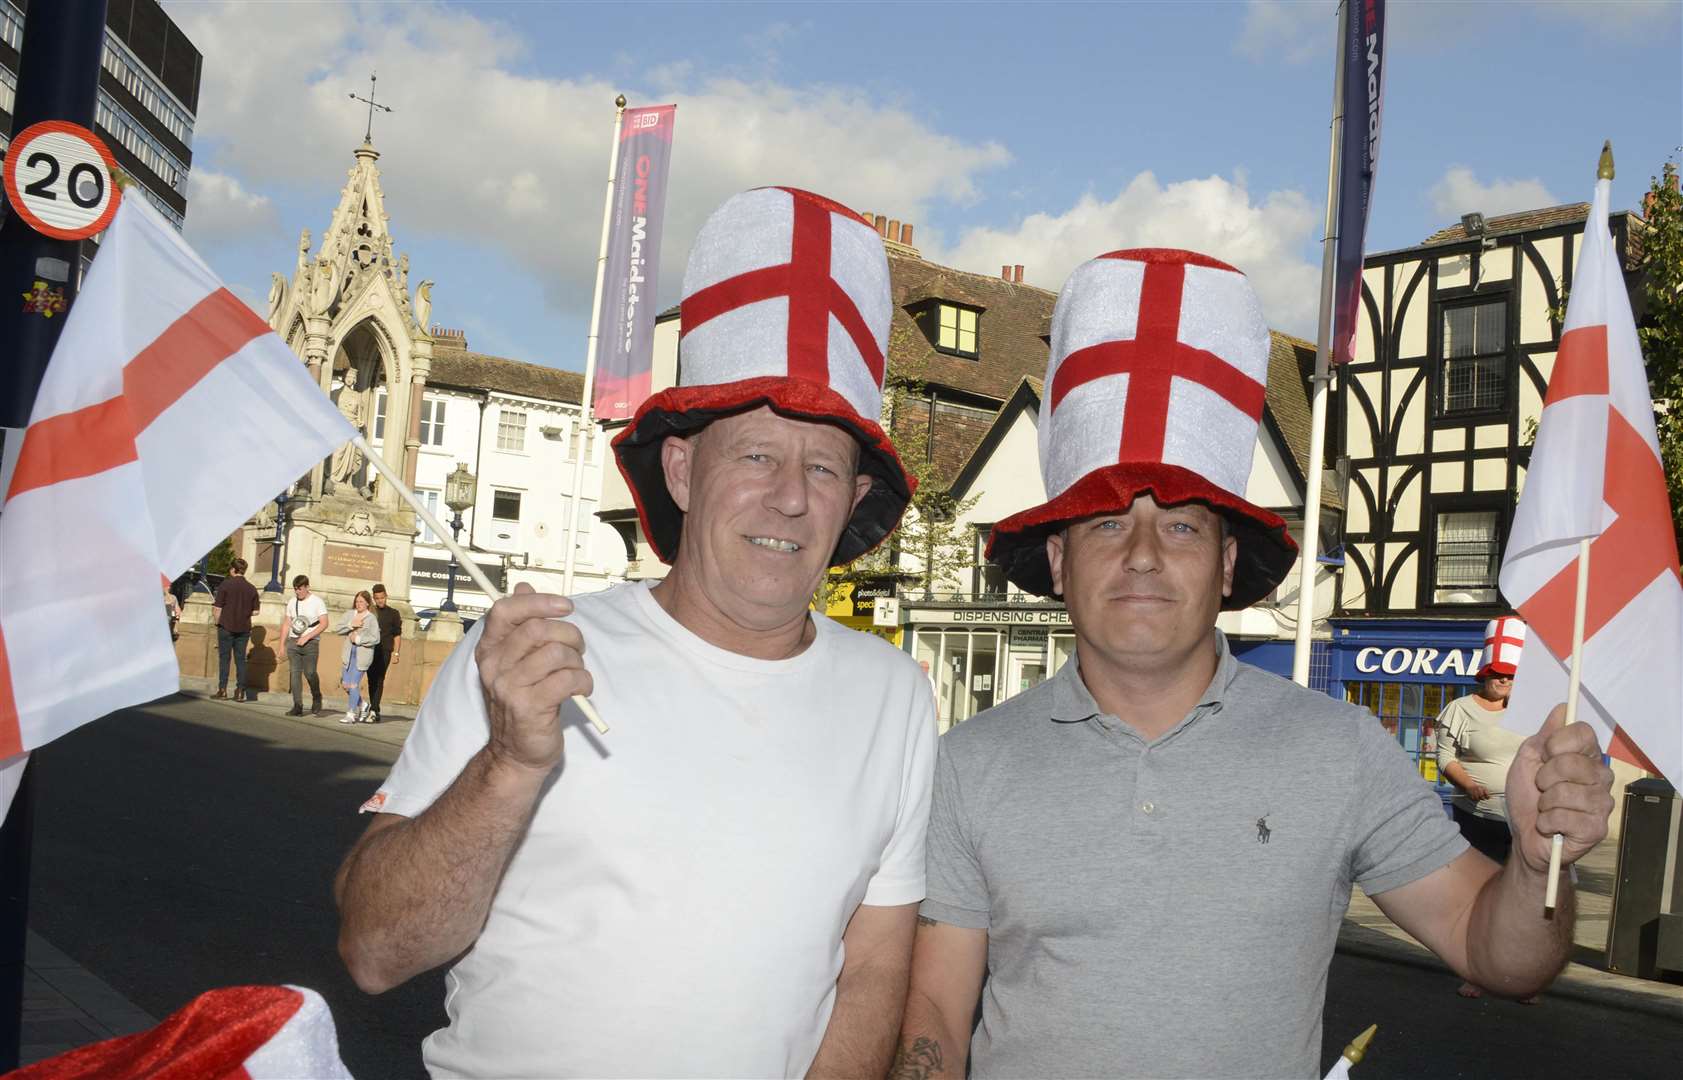 Graham and Simon Kerr have made a roaring trade in selling flags